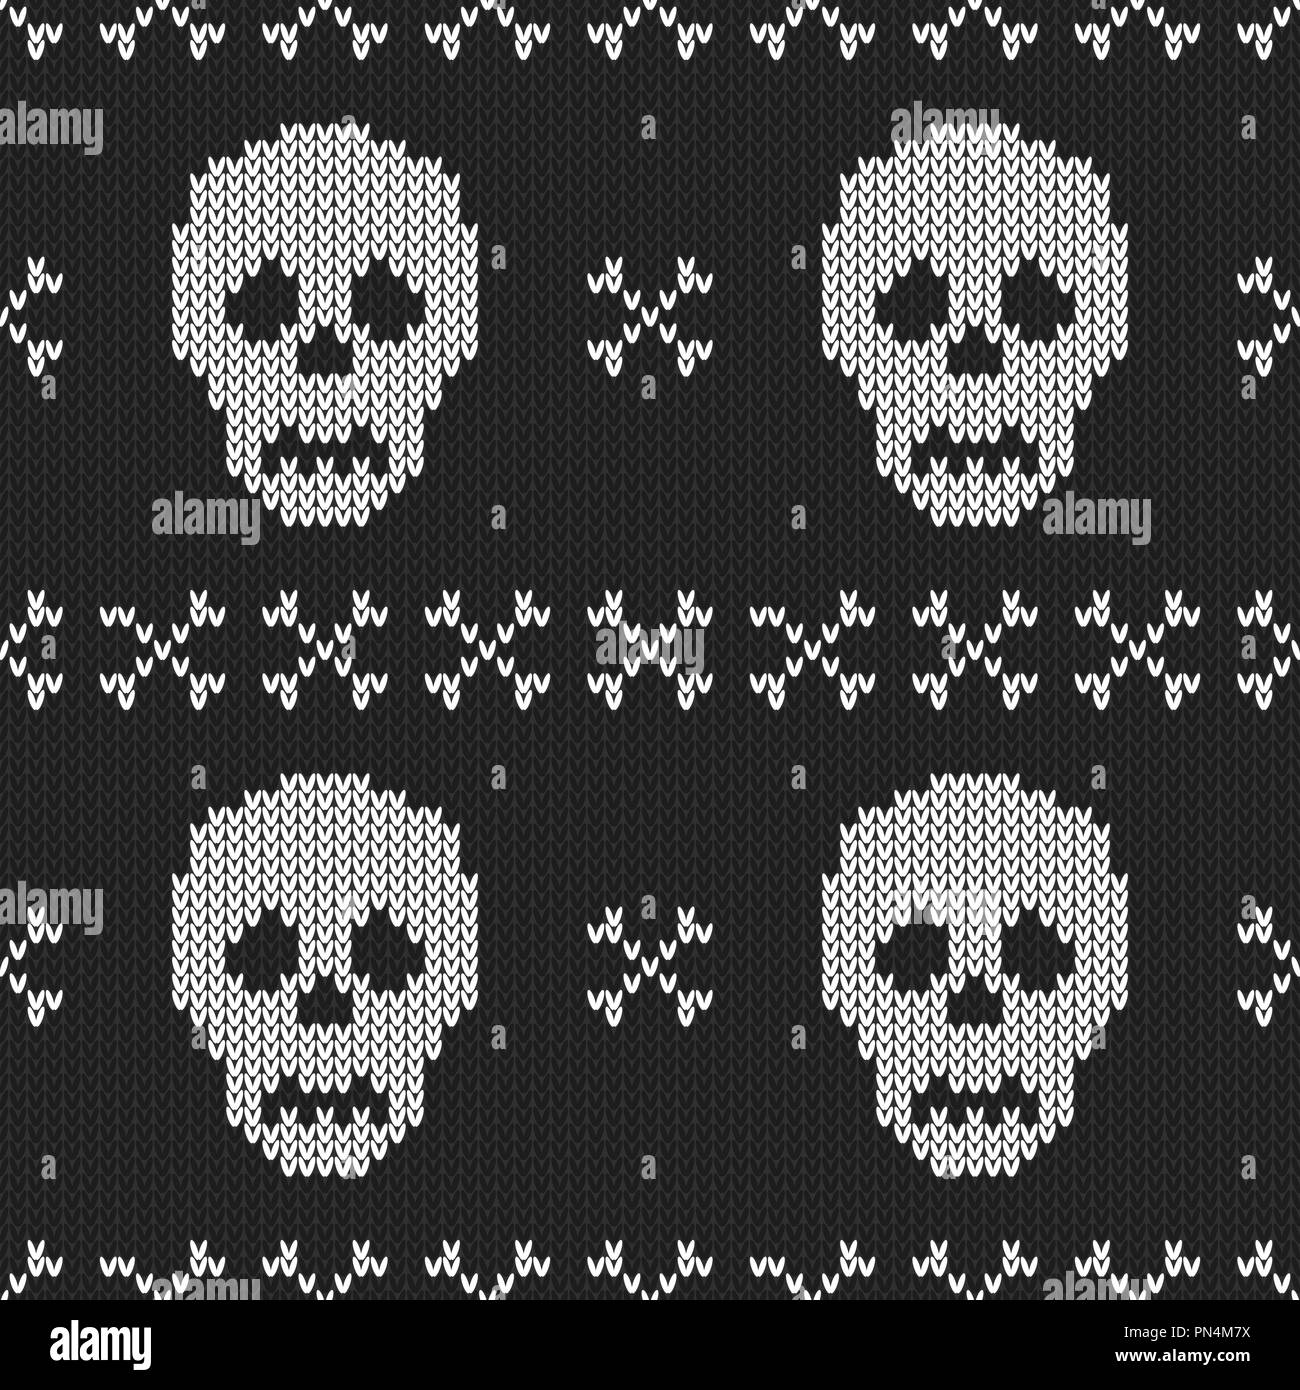 Ravelry: Skull Stockings pattern by Disorder Knits